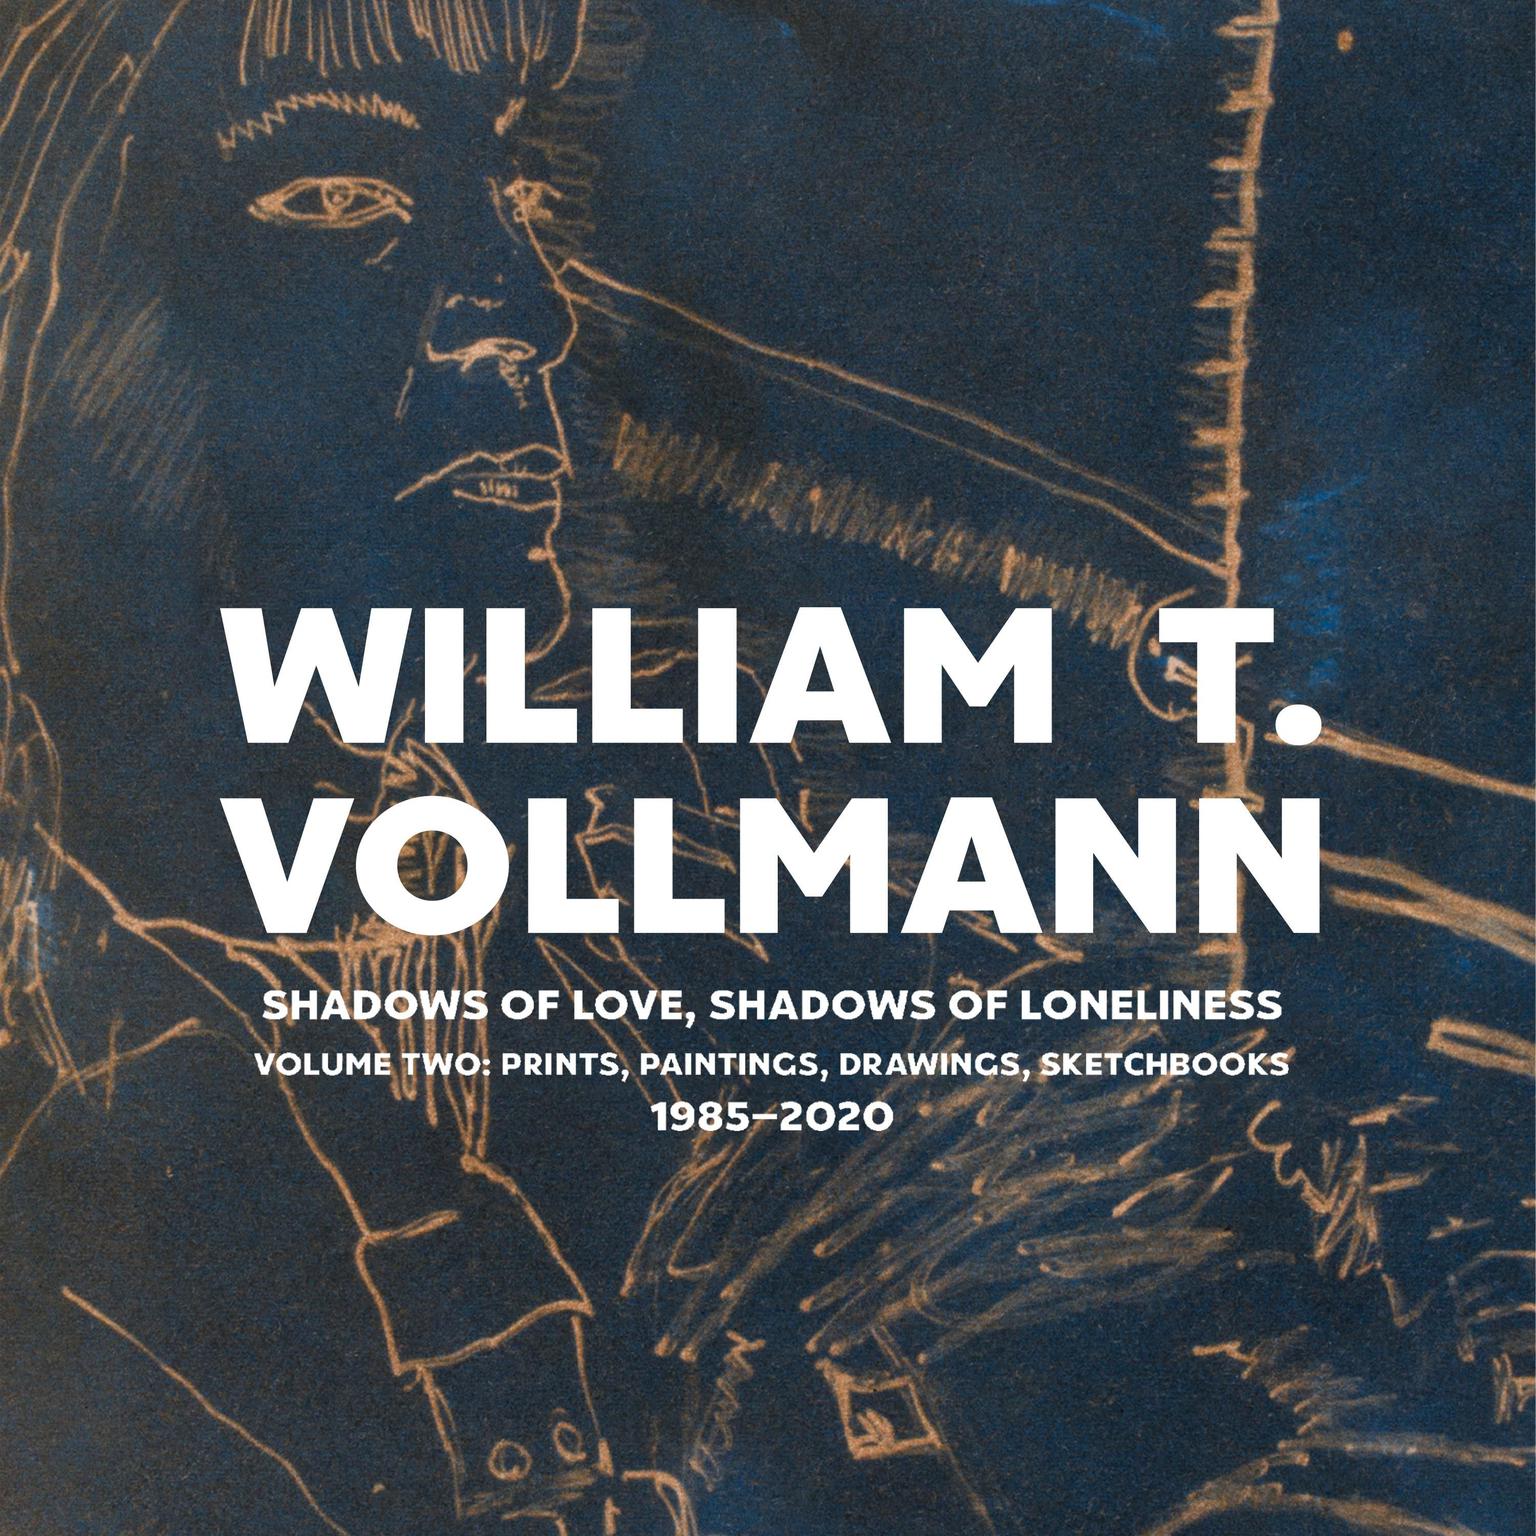 Shadows of Love, Shadows of Loneliness: Volume Two: Prints, Paintings, Drawings, Sketchbooks 1985-2020 Audiobook, by William T. Vollmann